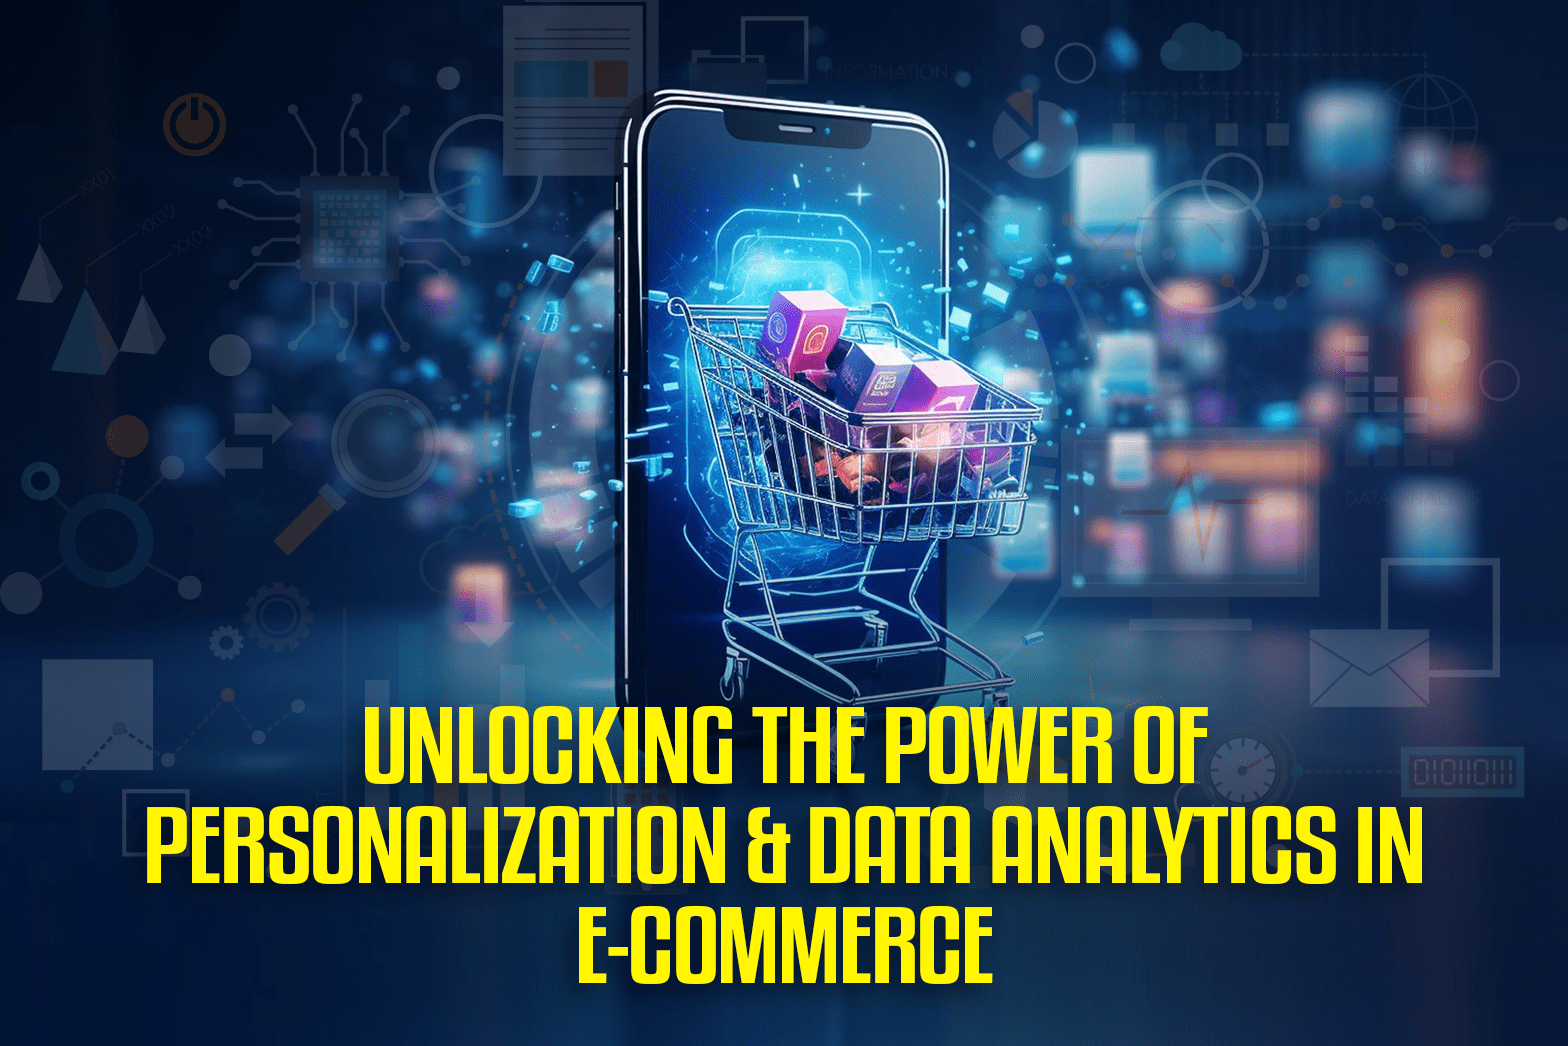 Unlocking the Power of Personalization & Data Analytics in e-commerce